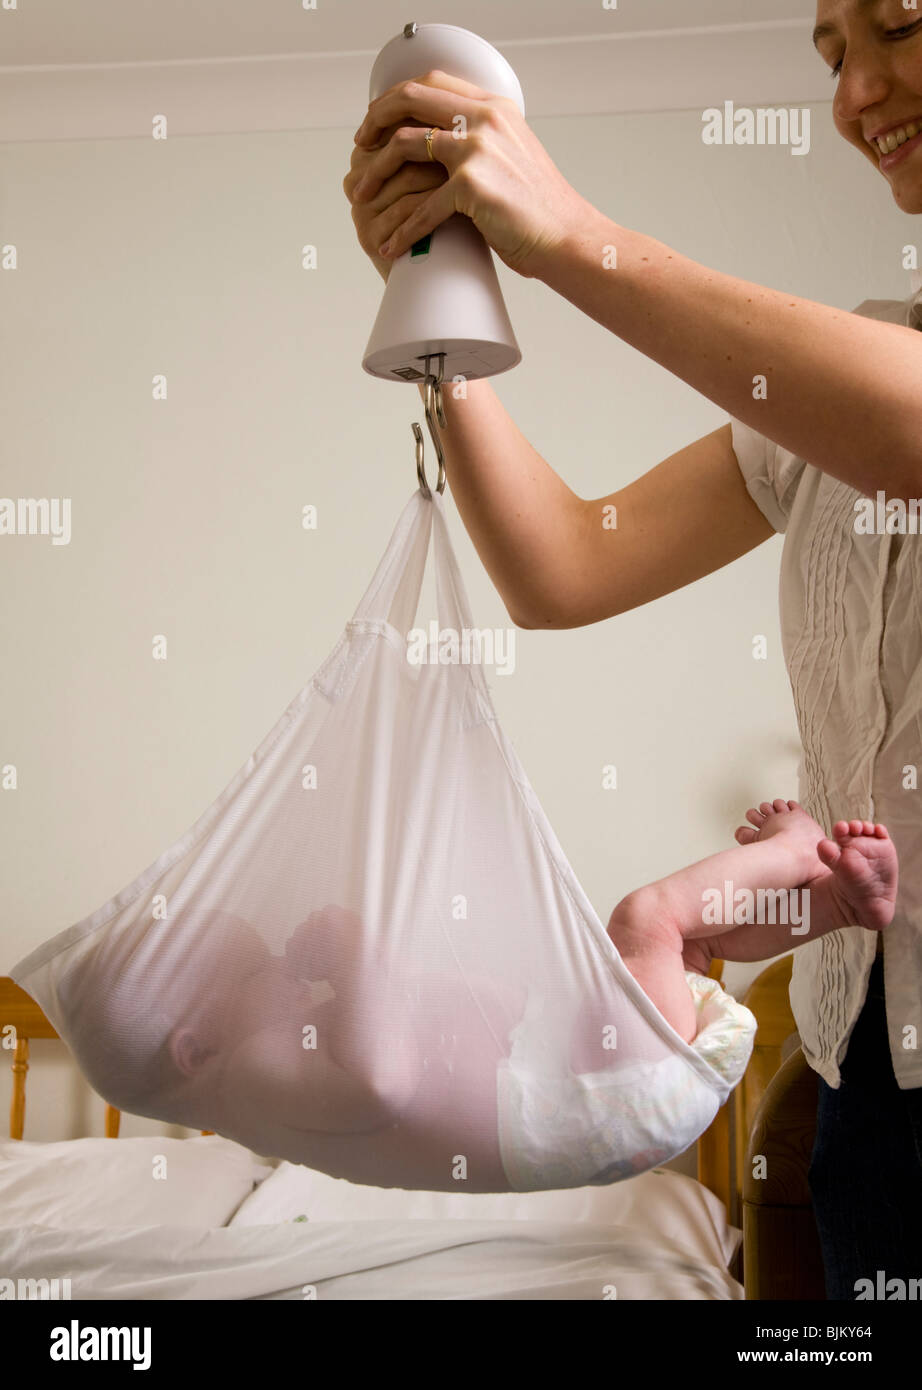 https://c8.alamy.com/comp/BJKY64/weighing-a-newborn-new-born-baby-with-scales-weight-scale-BJKY64.jpg